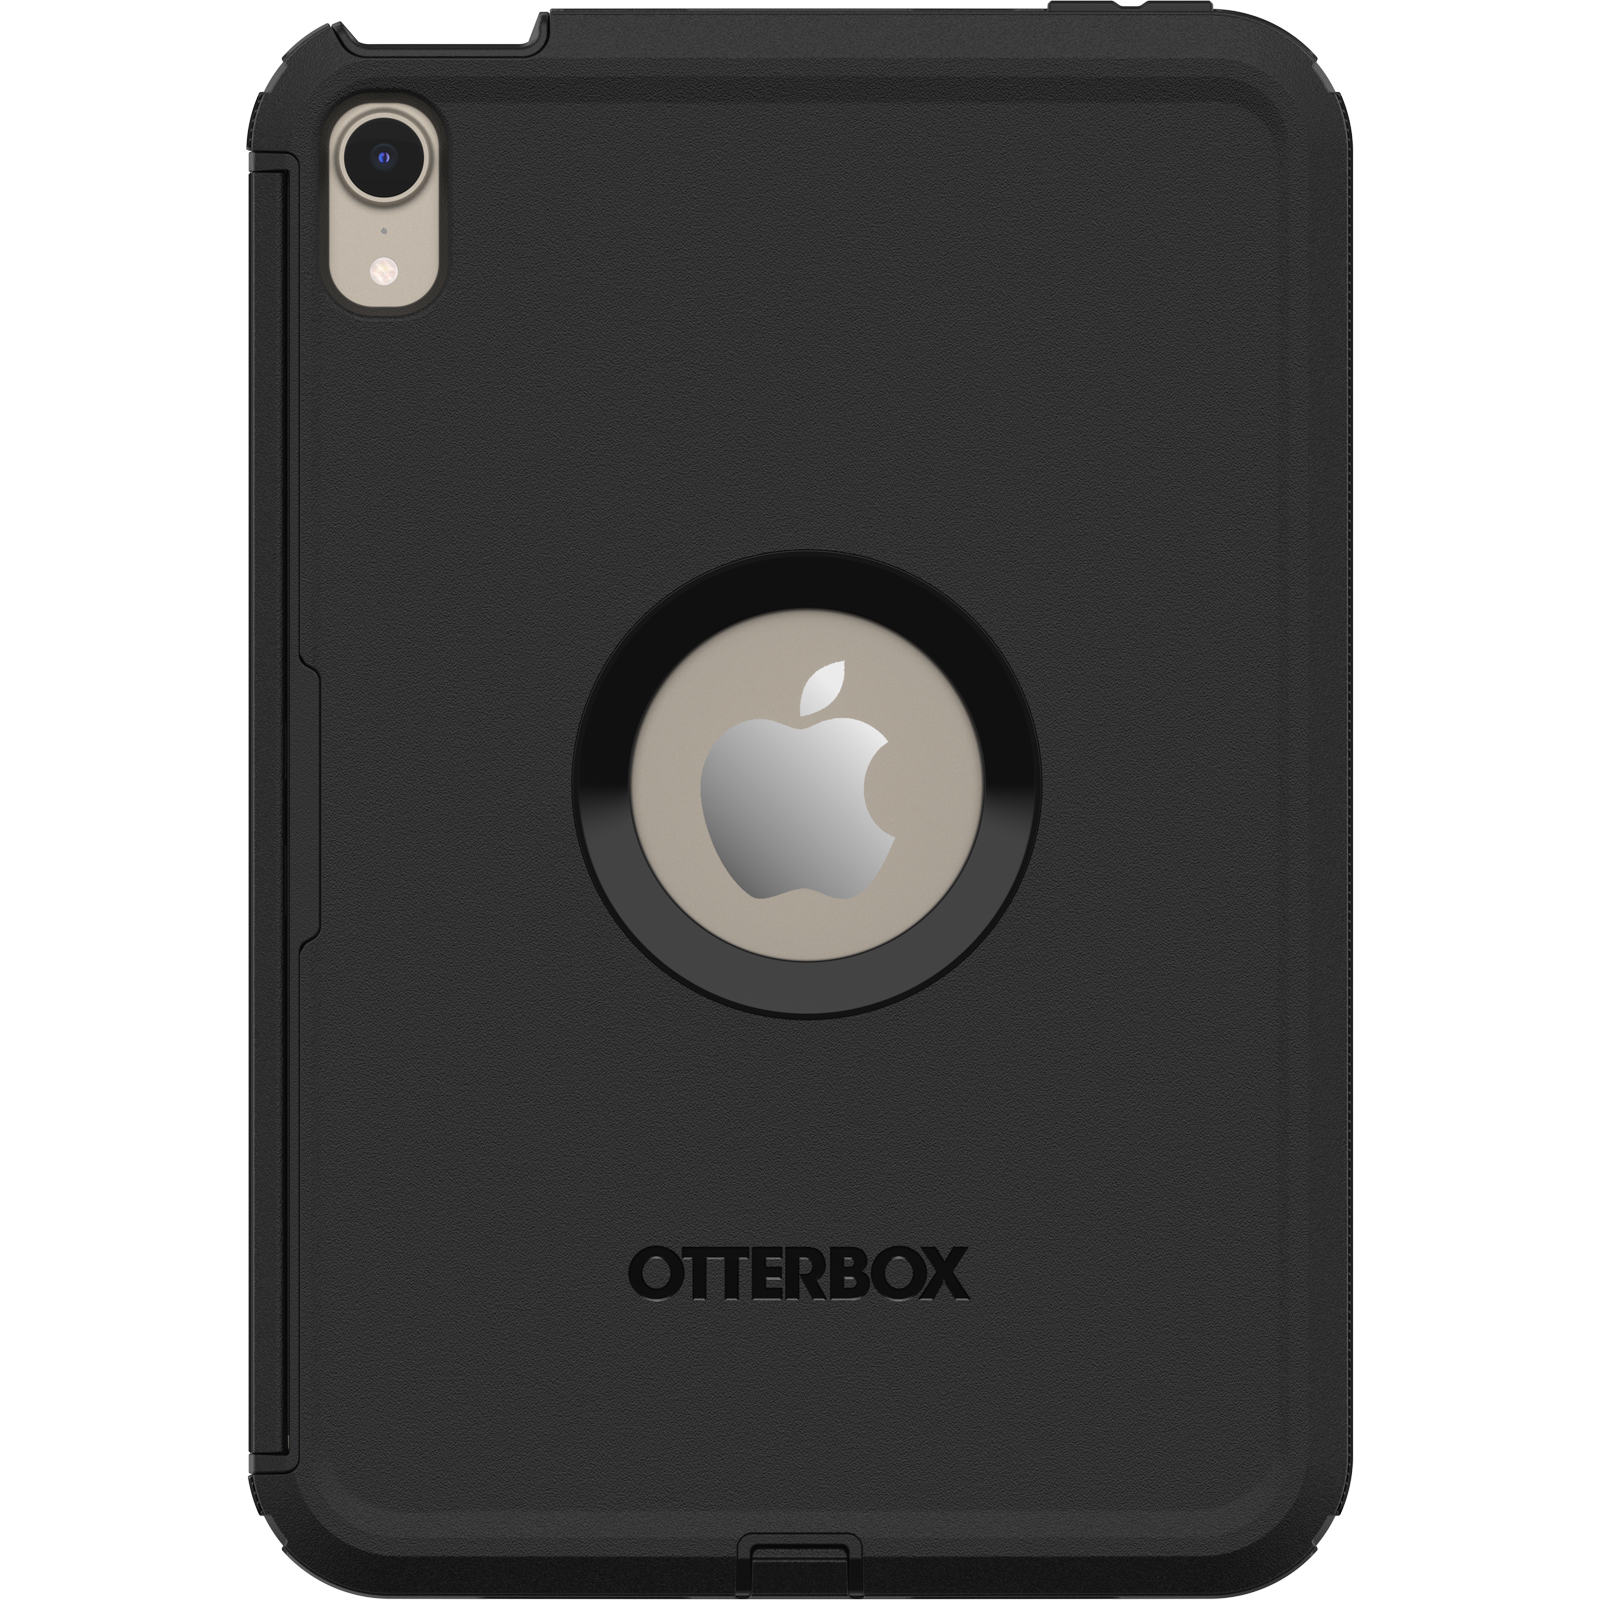 OtterBox Defender Series Case for iPad 